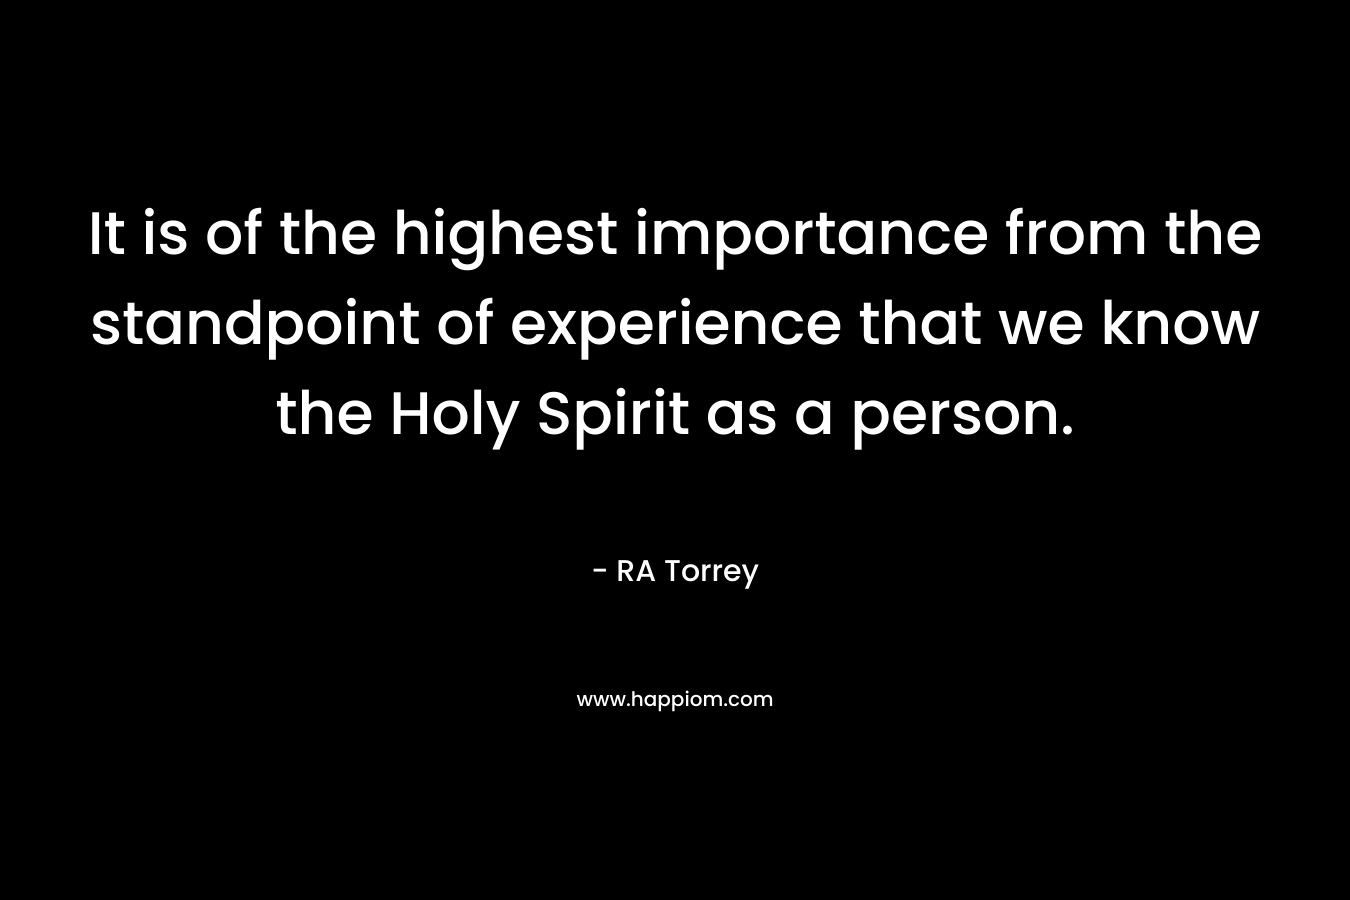 It is of the highest importance from the standpoint of experience that we know the Holy Spirit as a person. – RA Torrey